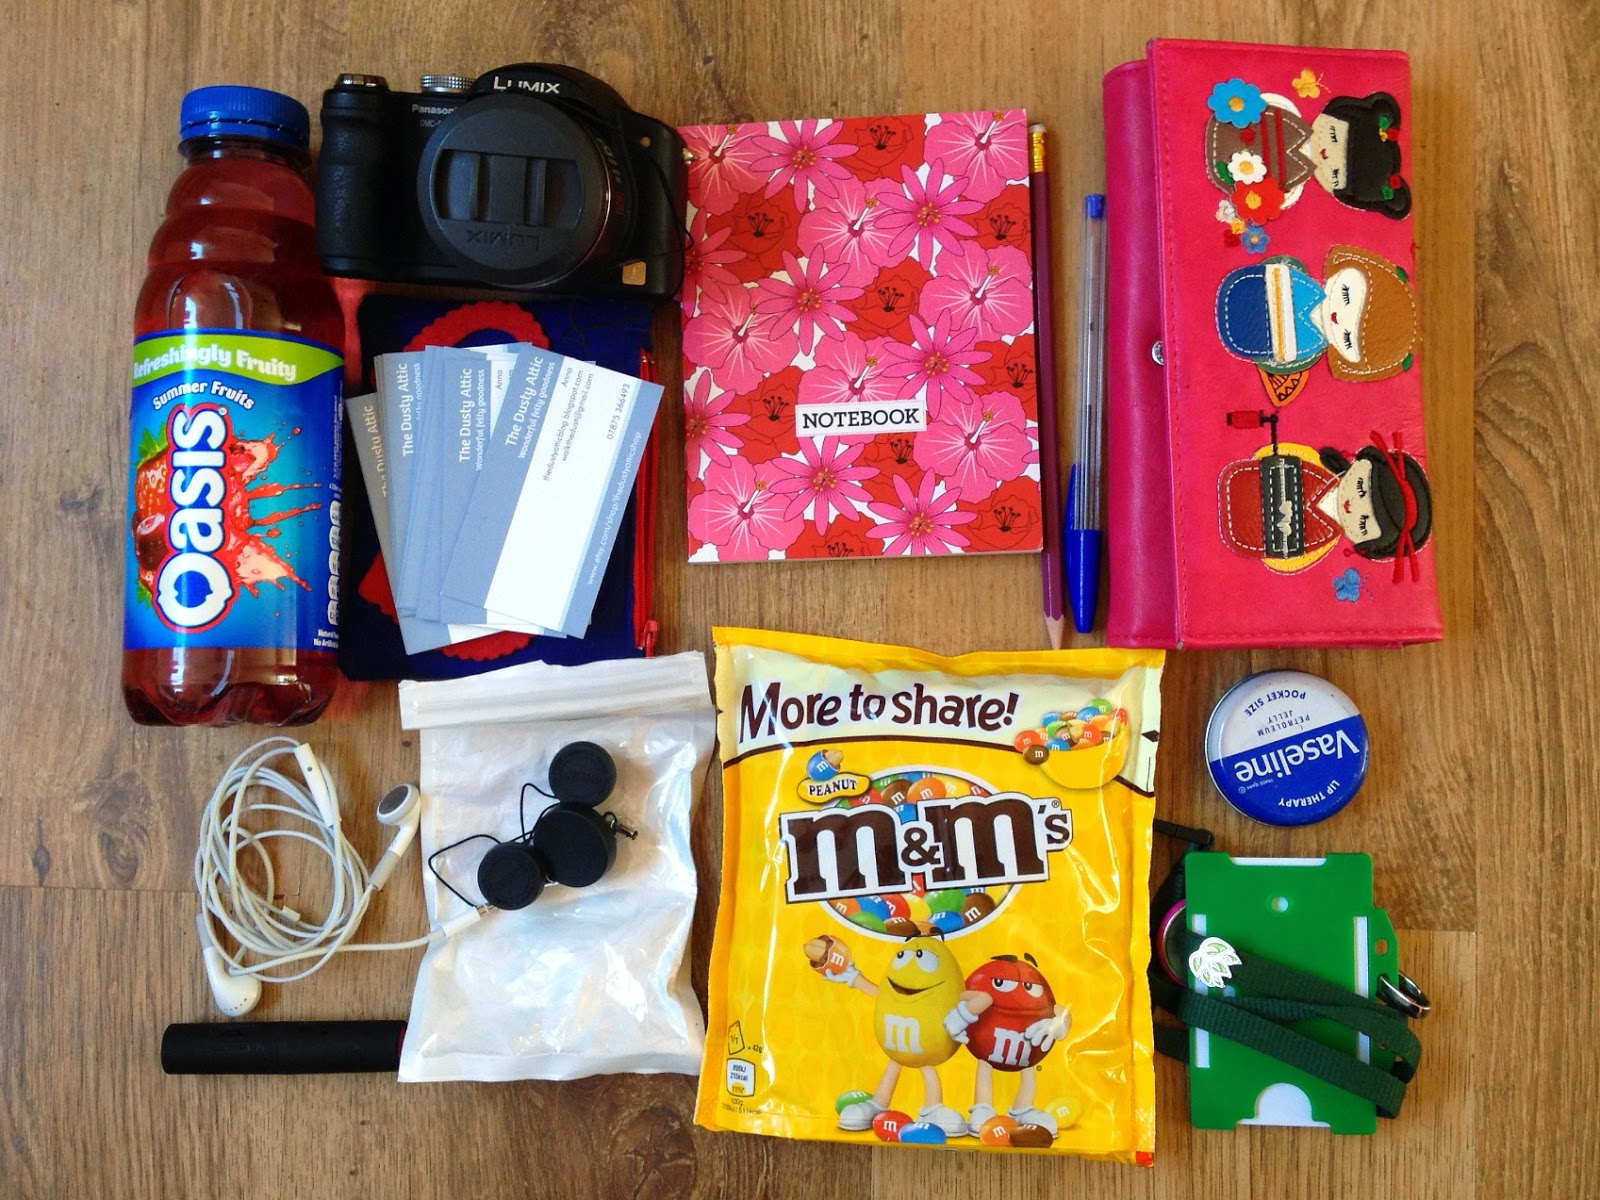 woolfest survival kit - or - what's in my bag for woolfest